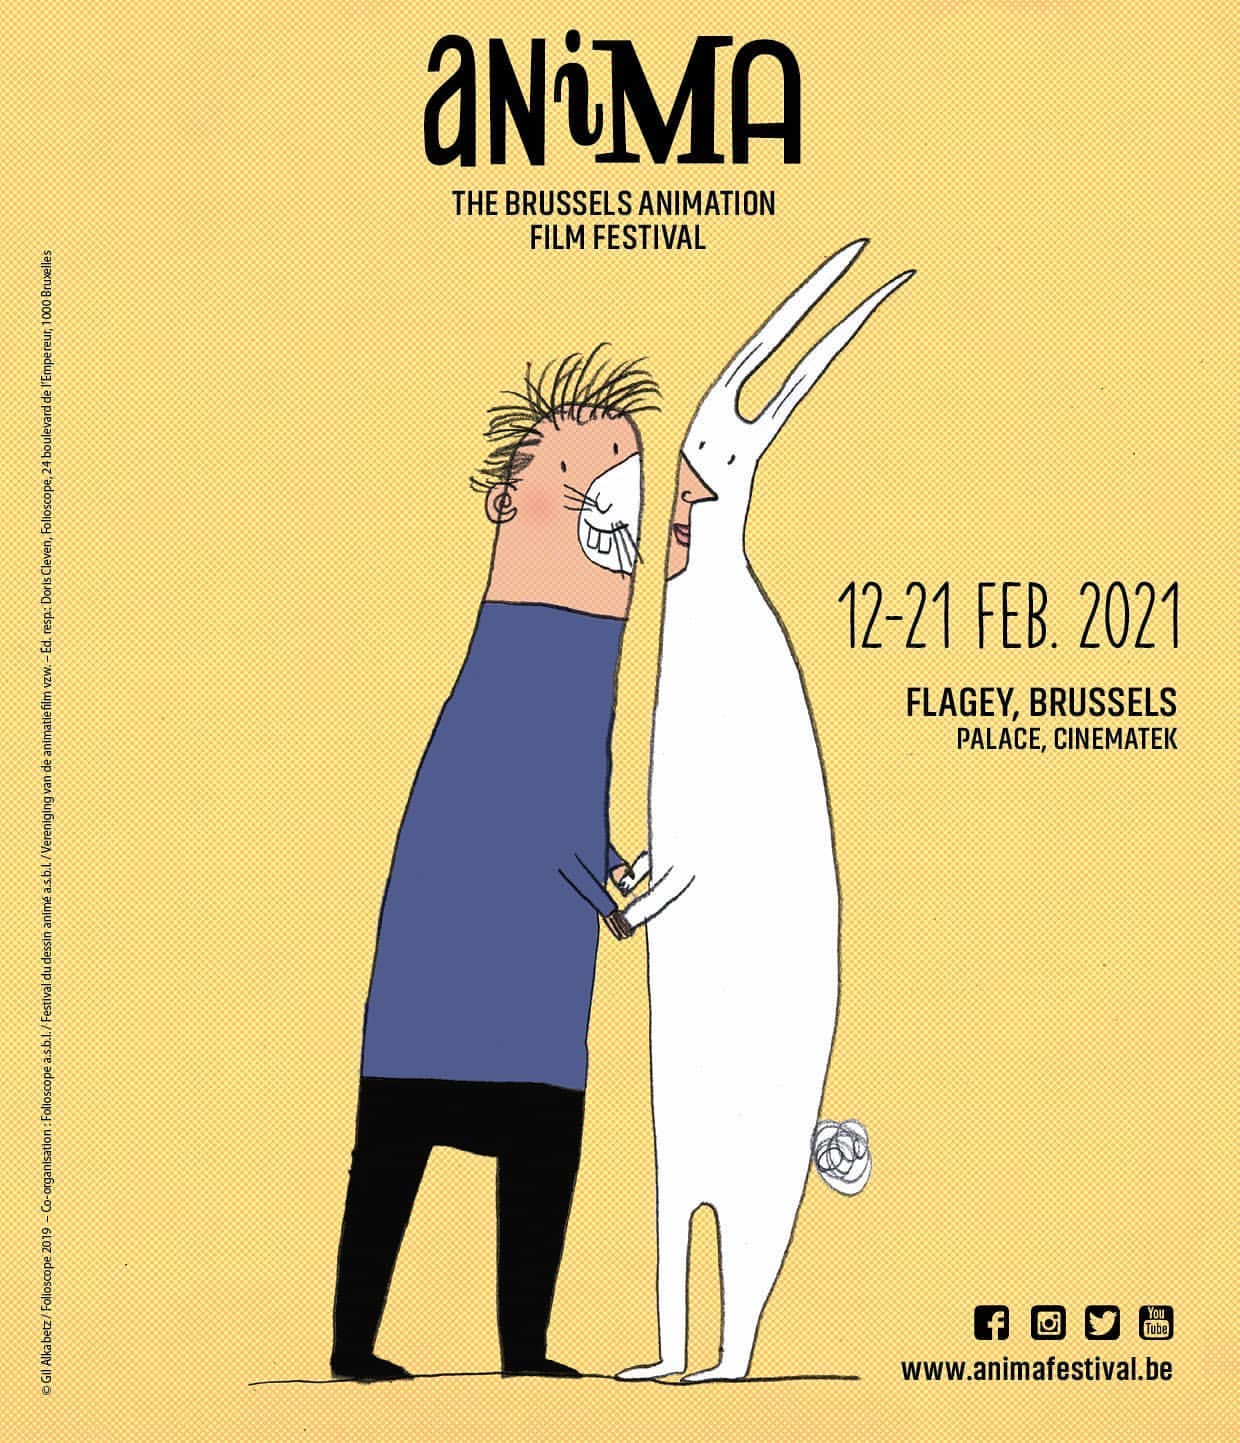 News of Anima, The Brussels Animation Film Festival